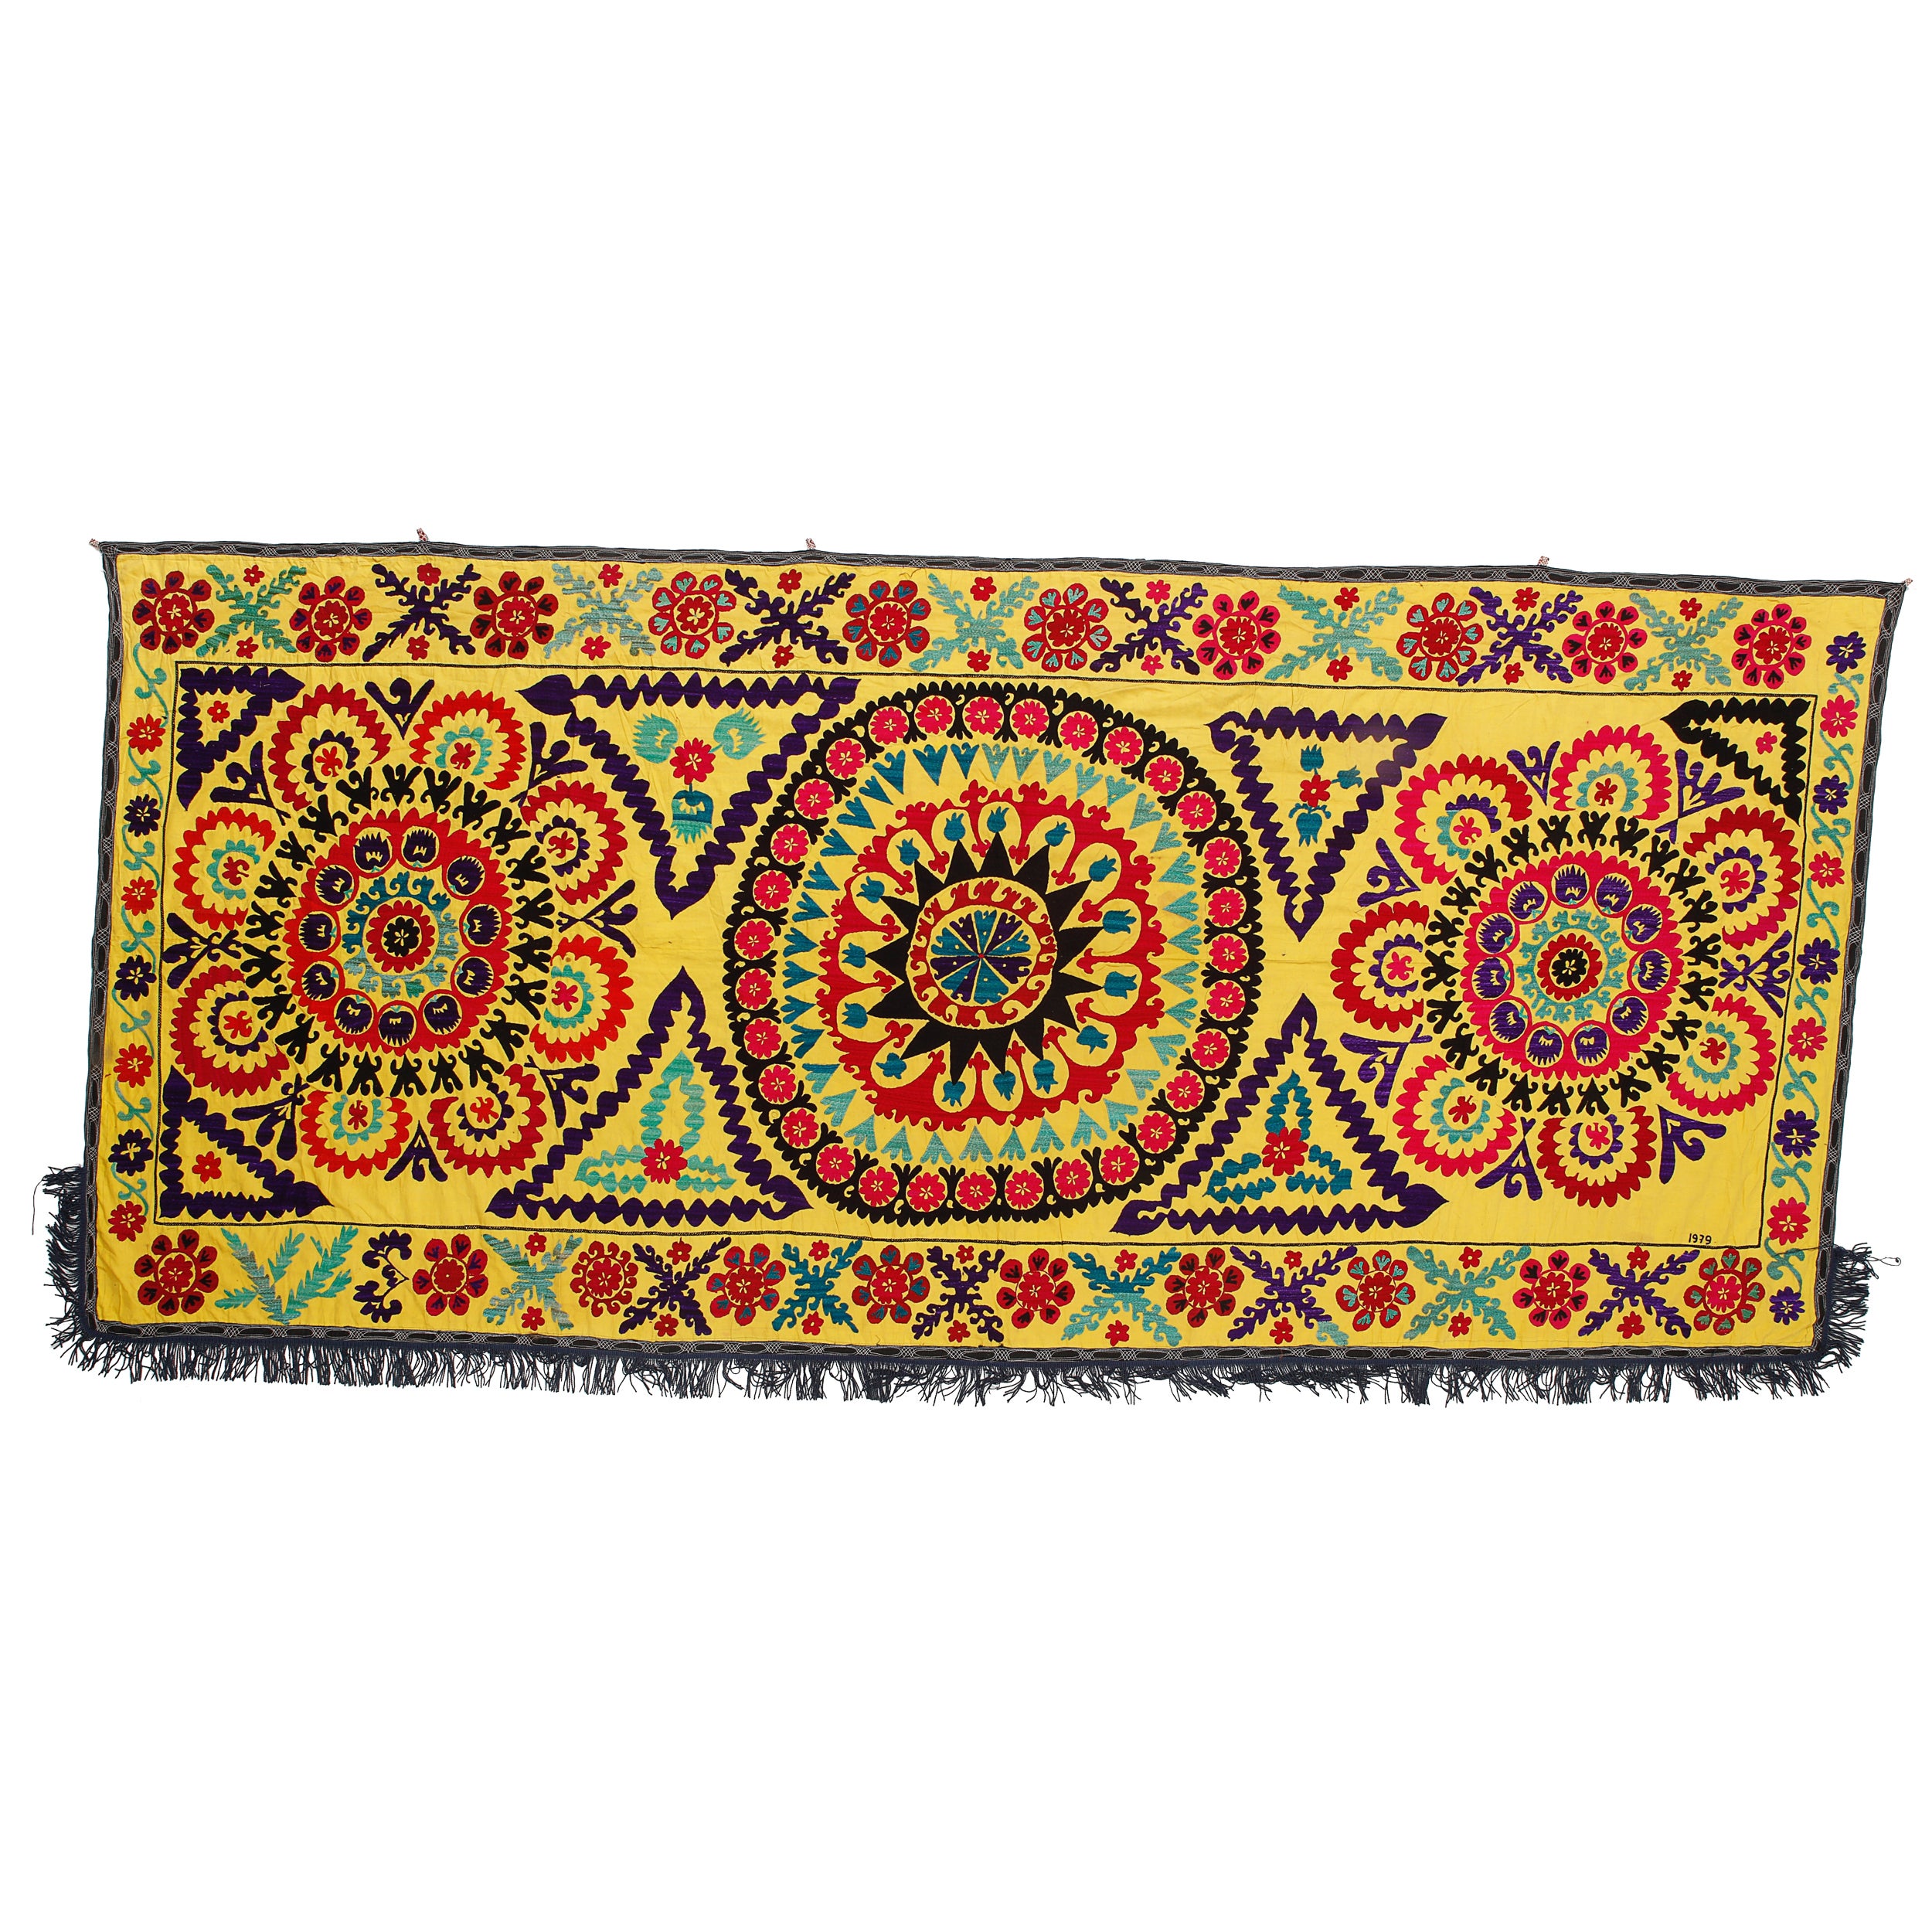 4.7x10.5 ft Handmade Suzani Wall Hanging in Yellow, Silk Embroidery Table Runner For Sale